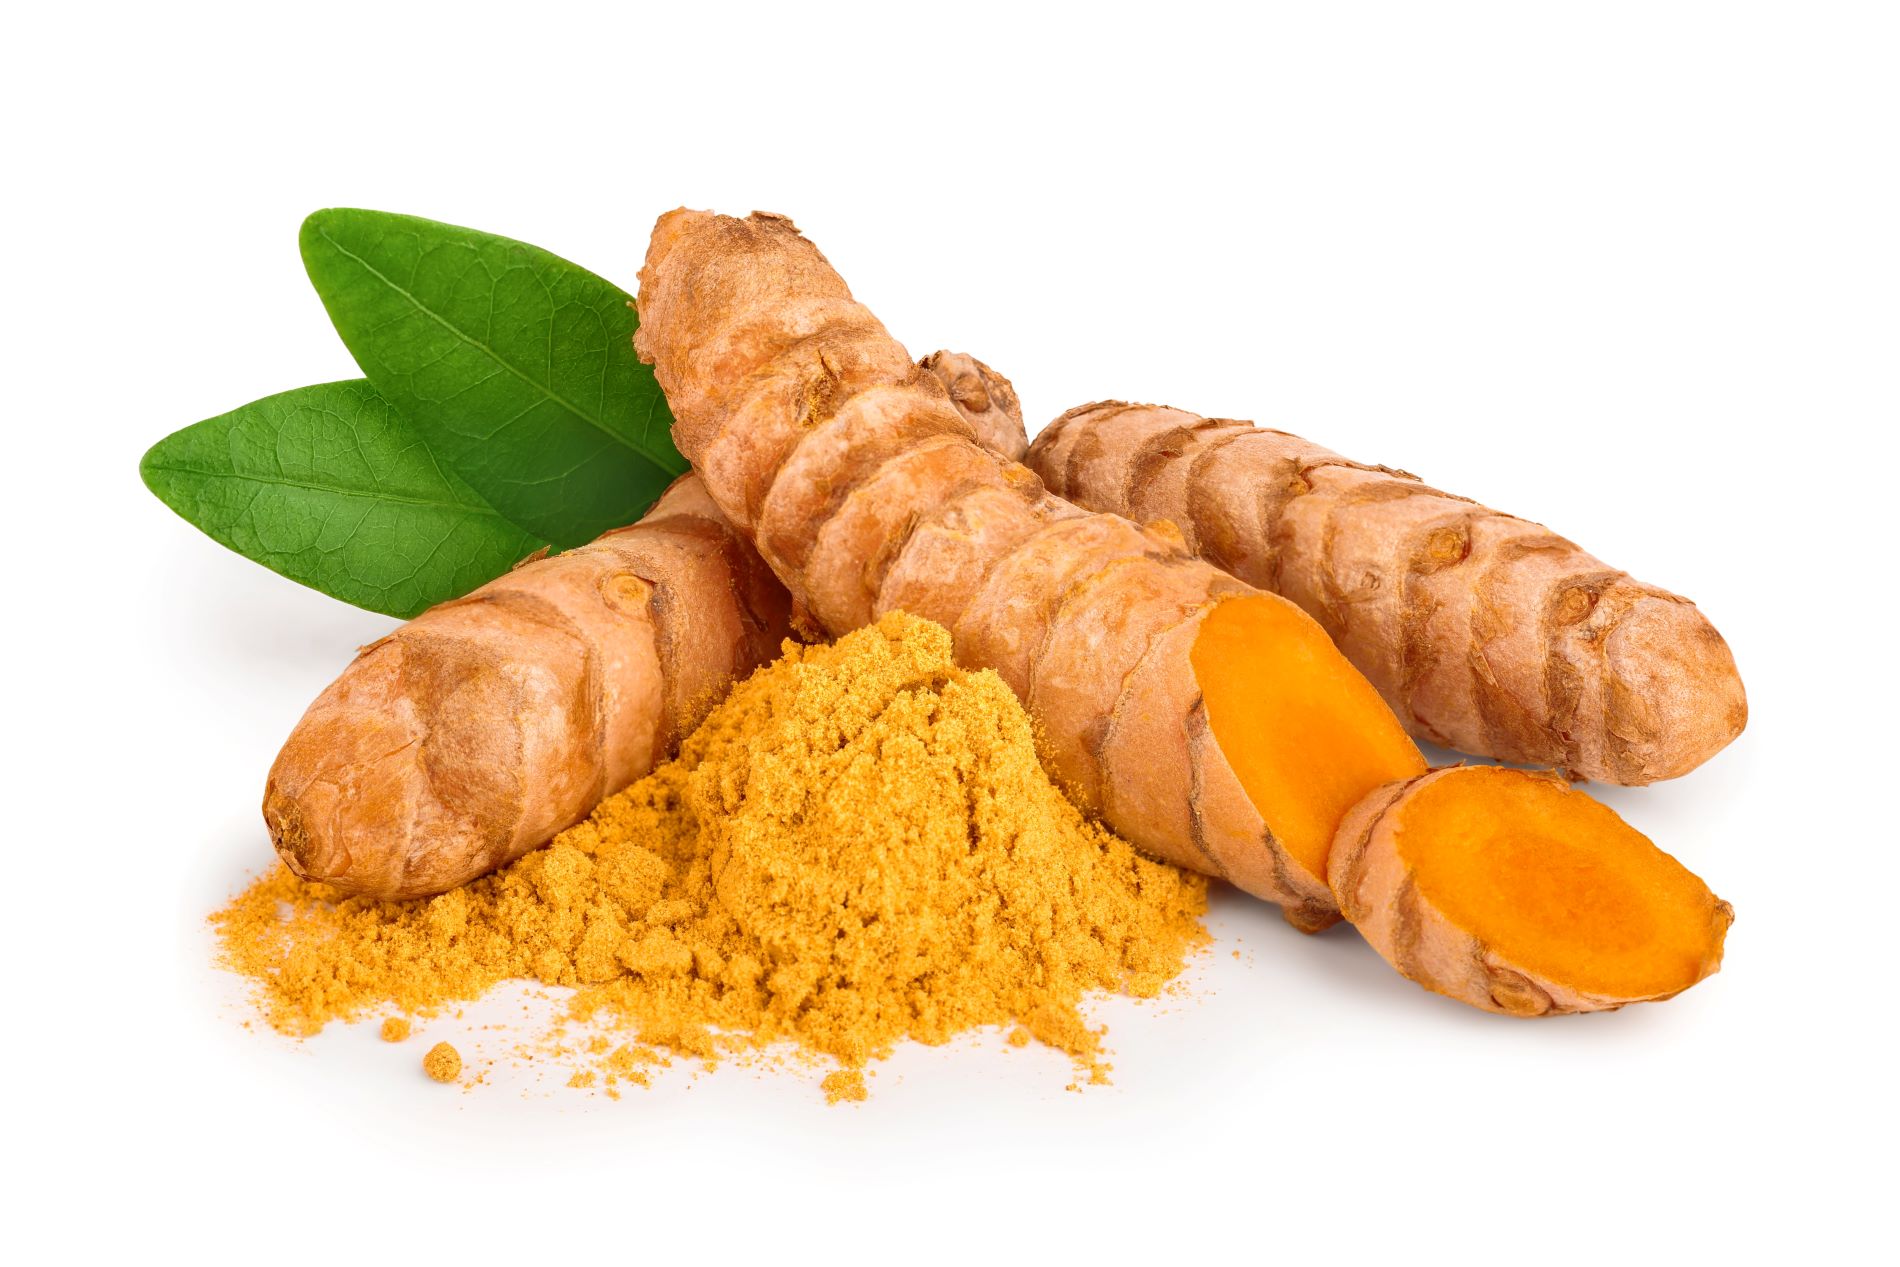 How To Store Turmeric Root